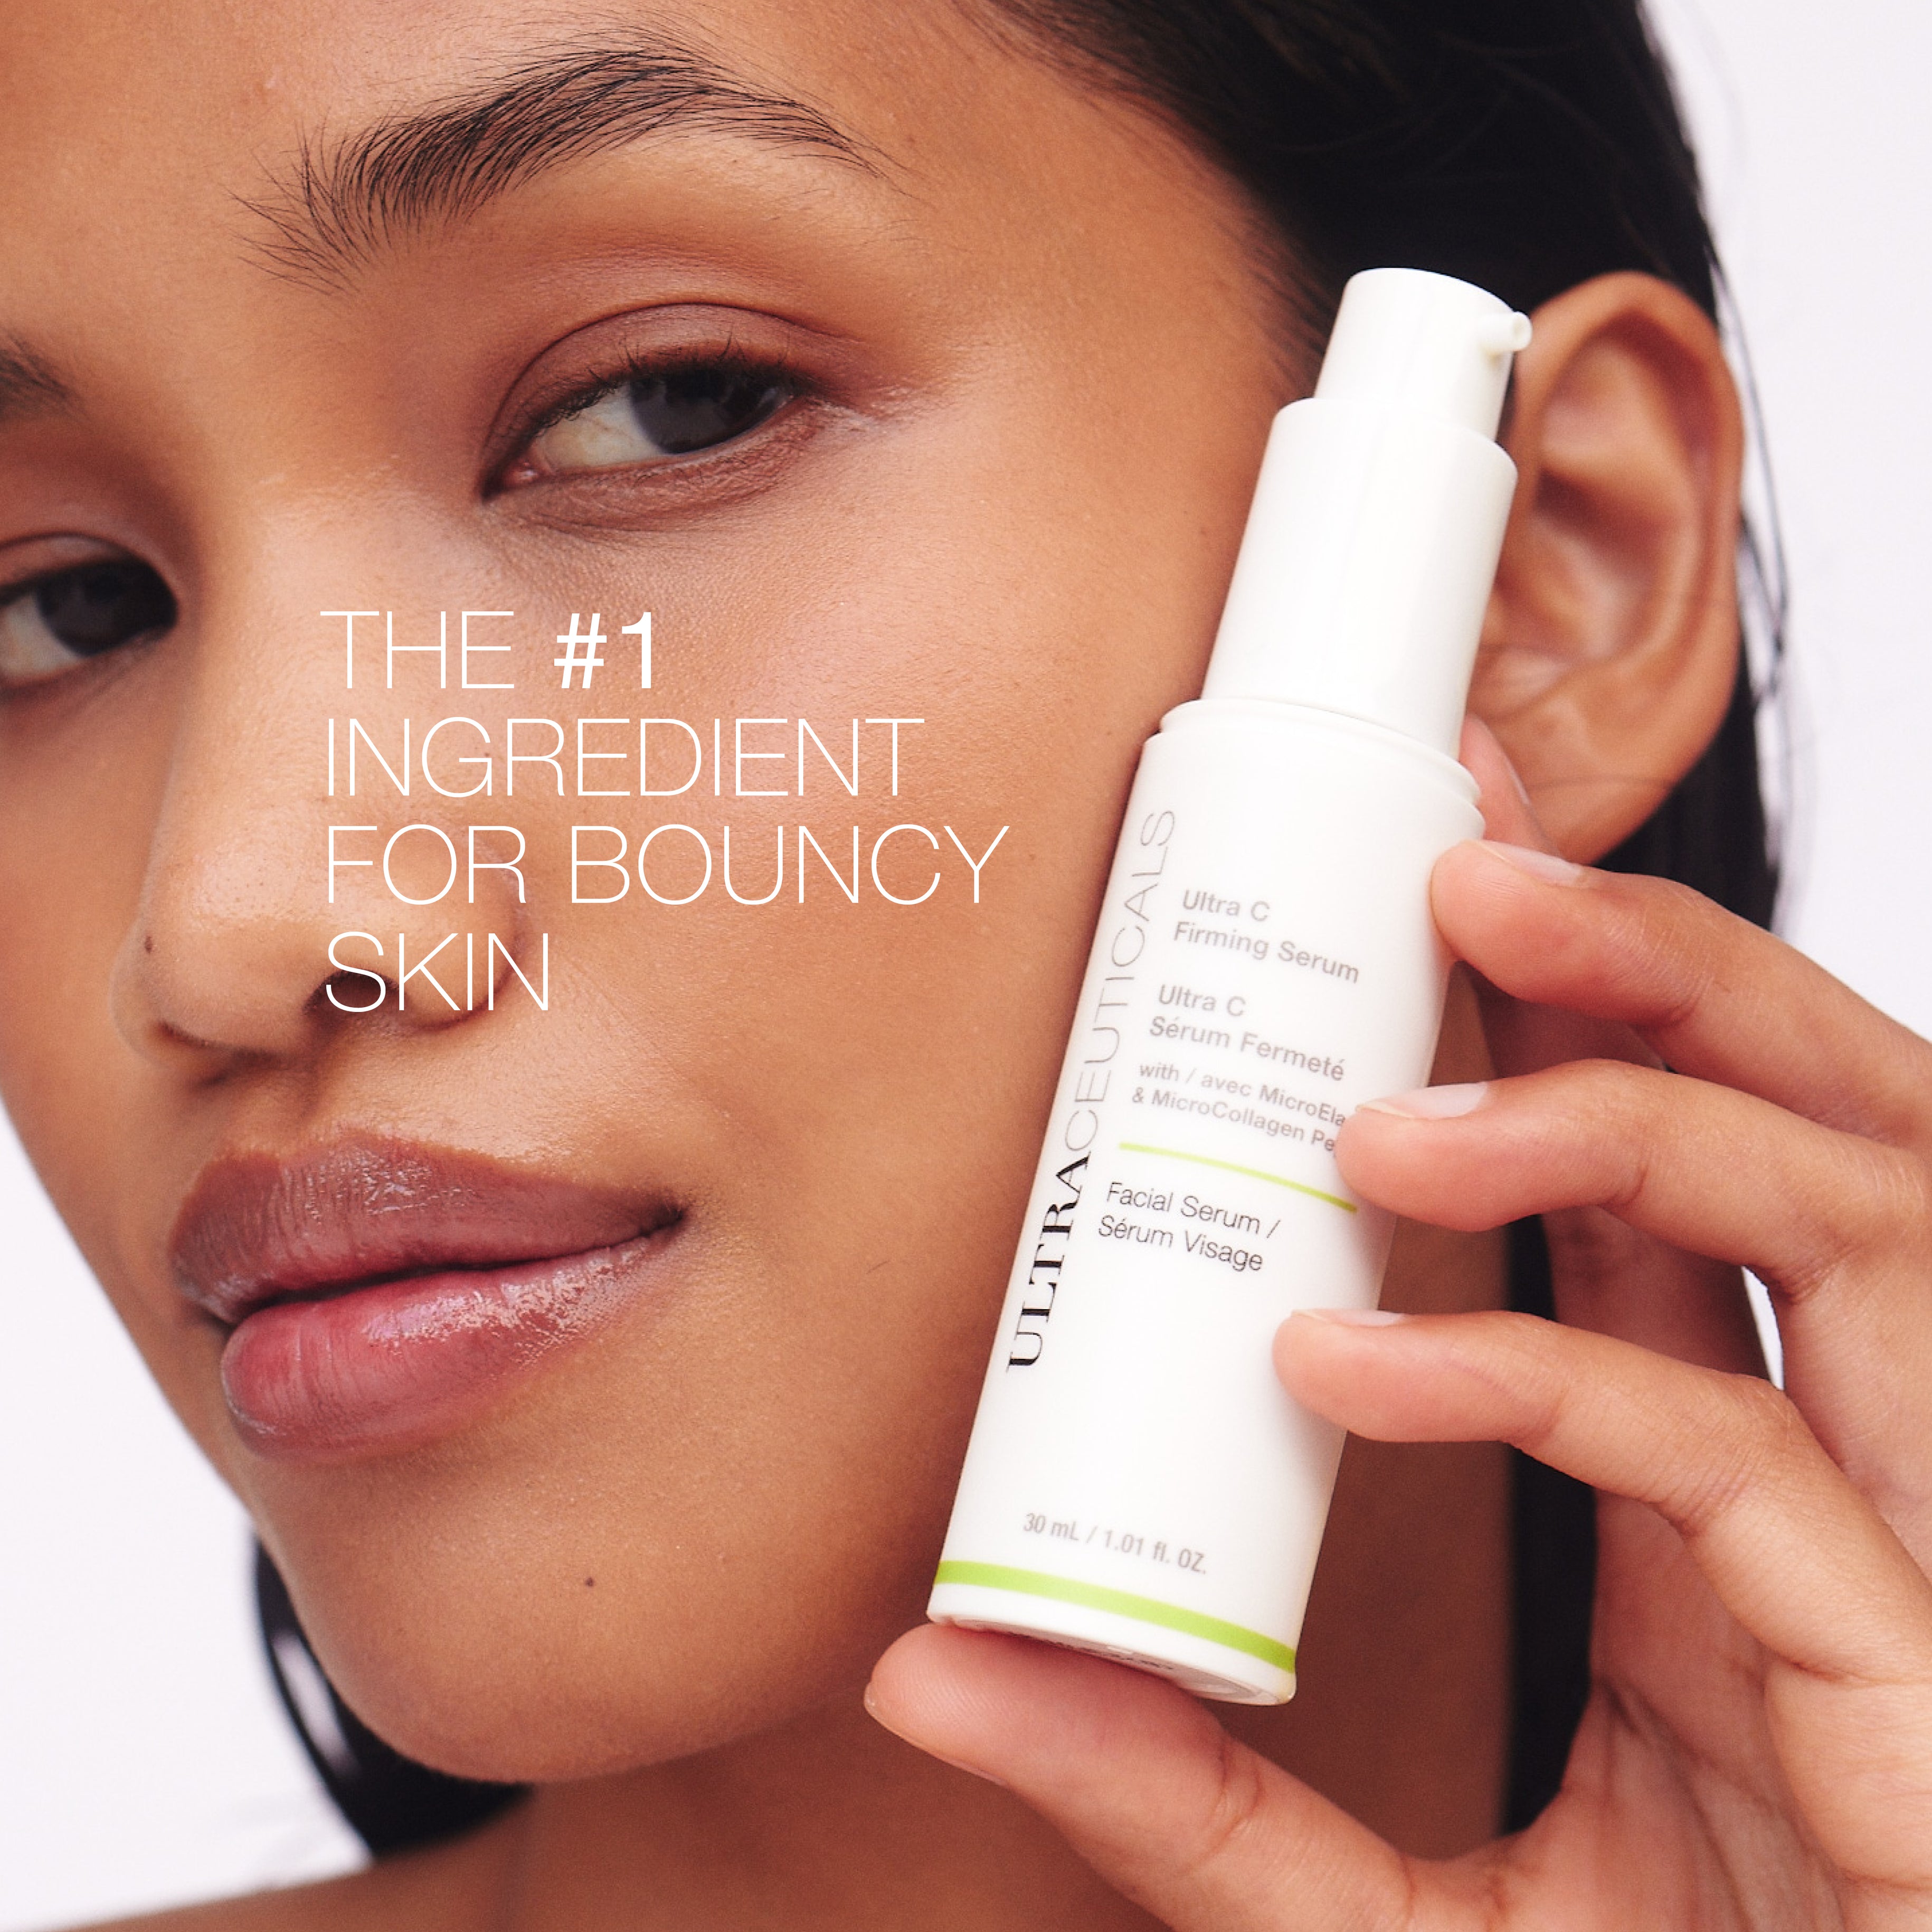 The #1 Ingredient For Bouncy Skin